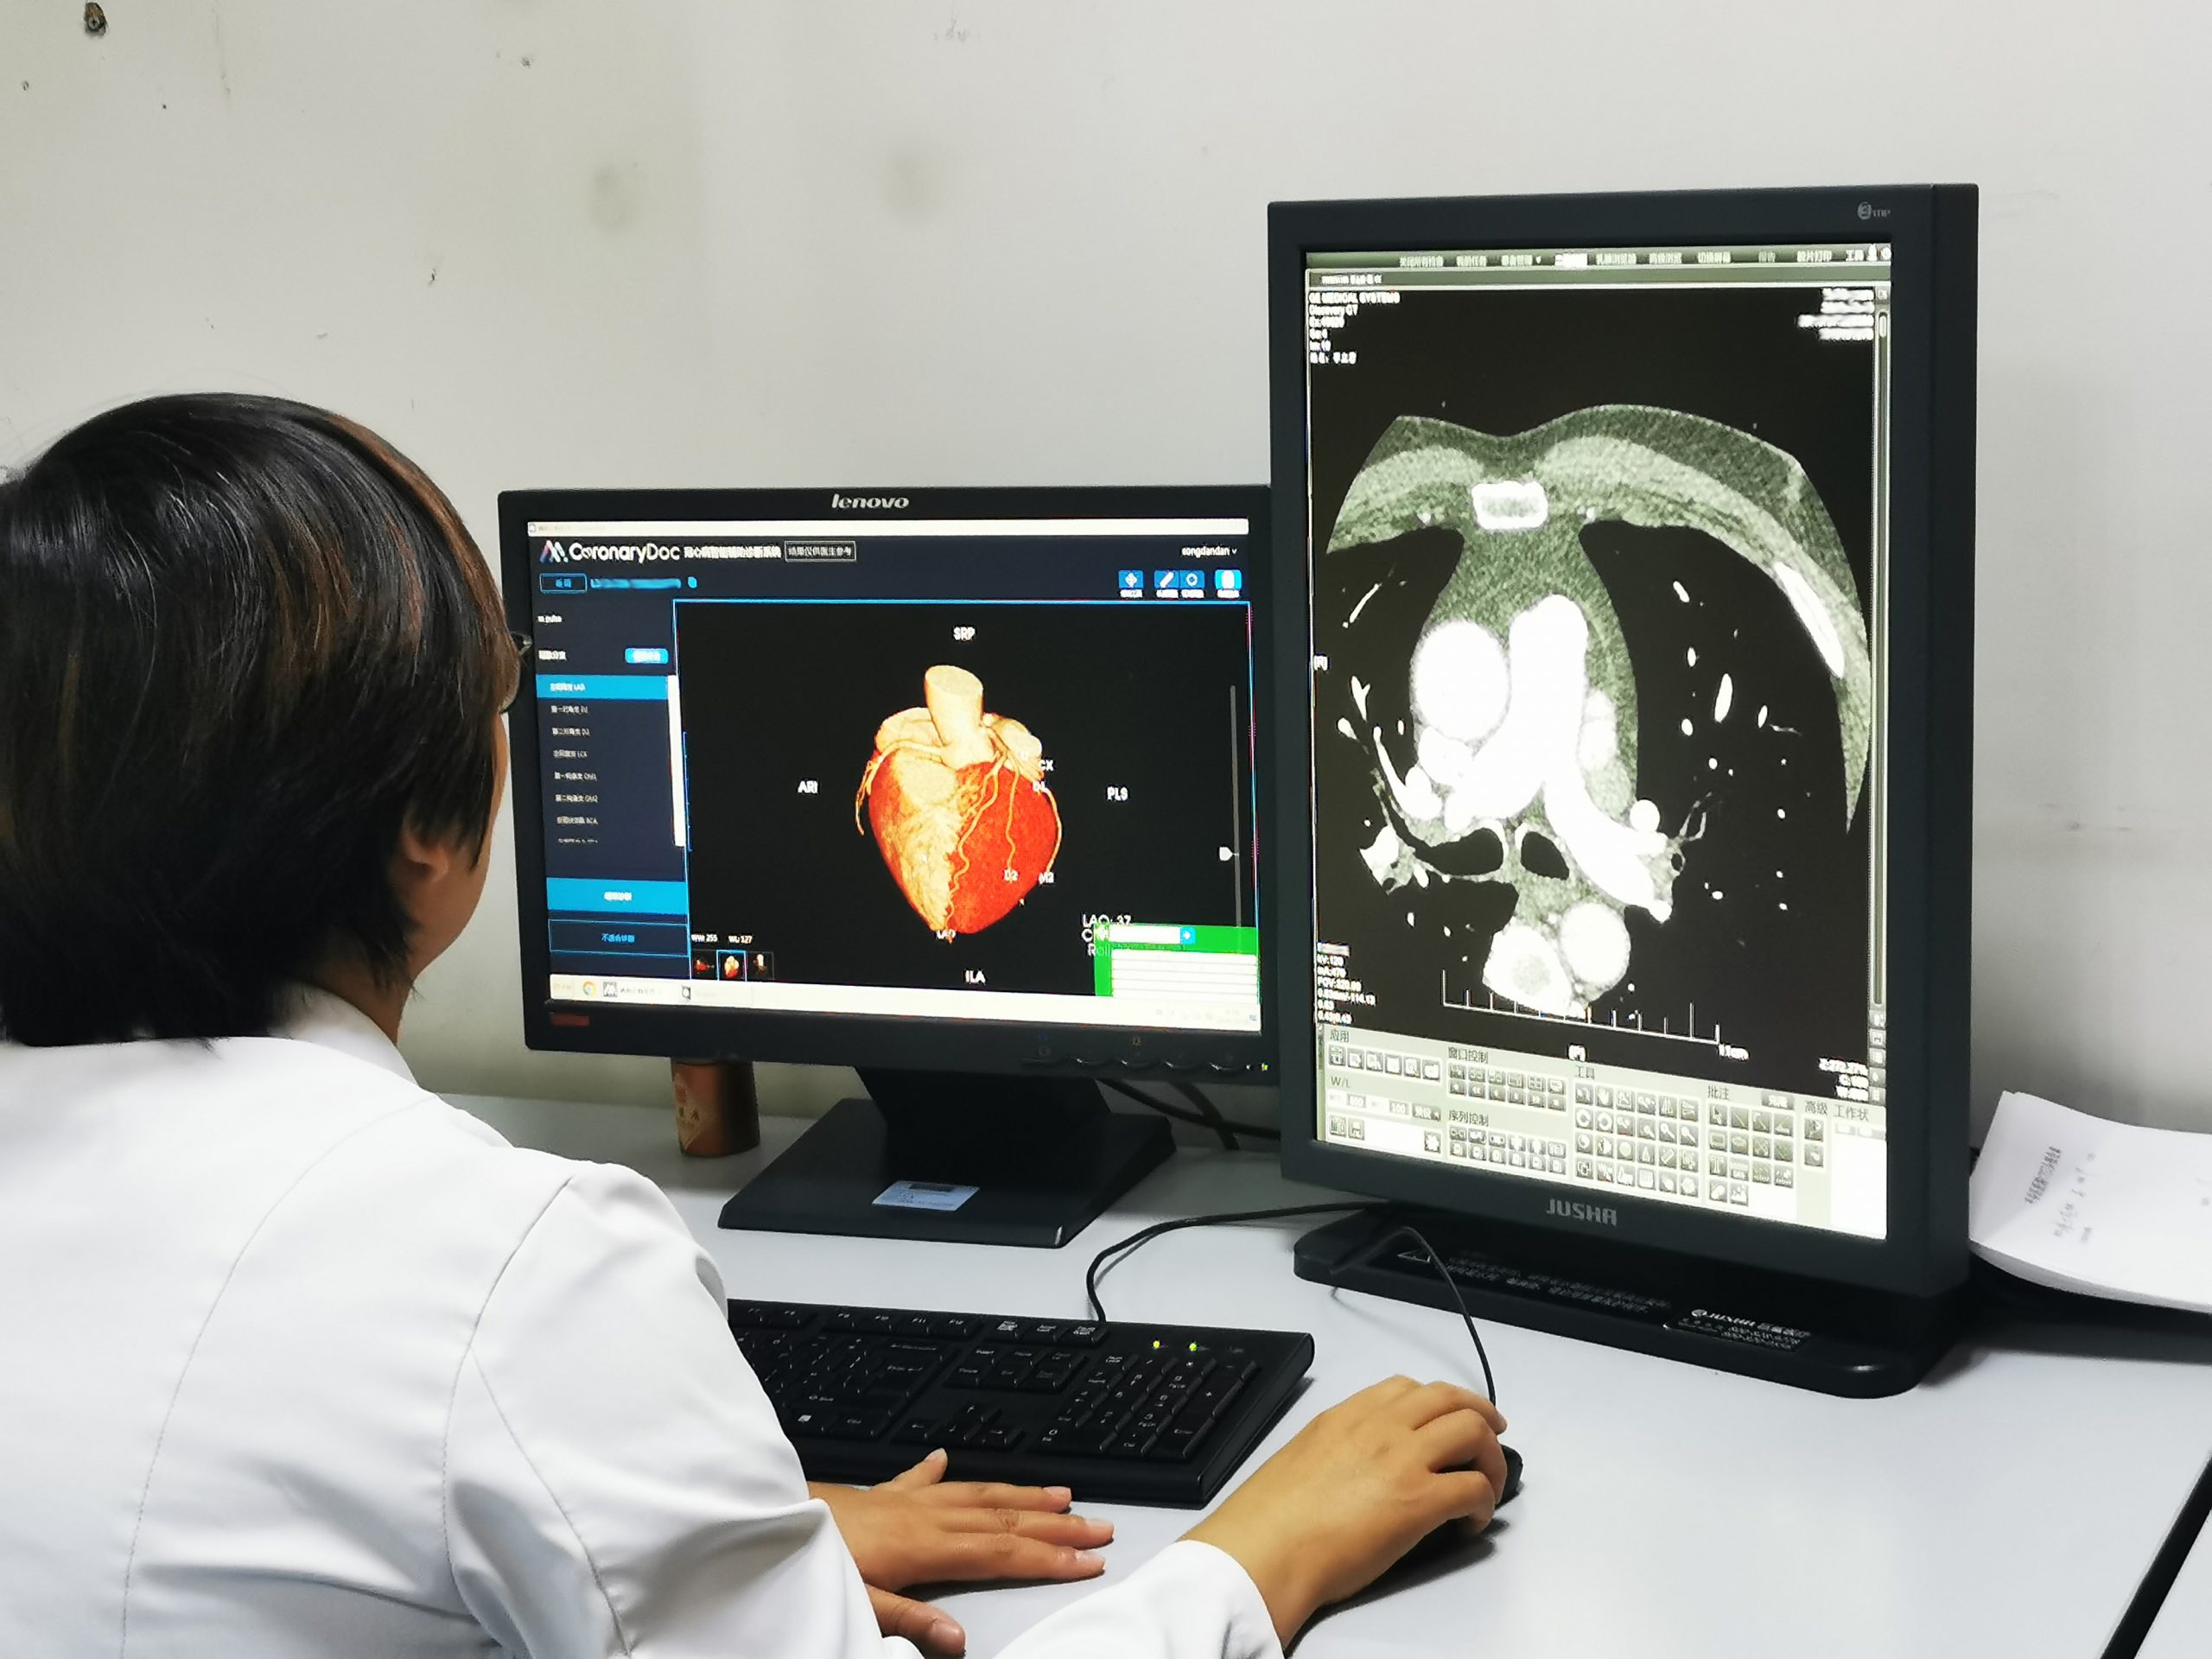 AI to boost doctors’ efficiency with imaging diagnostics: Inside China’s Startups